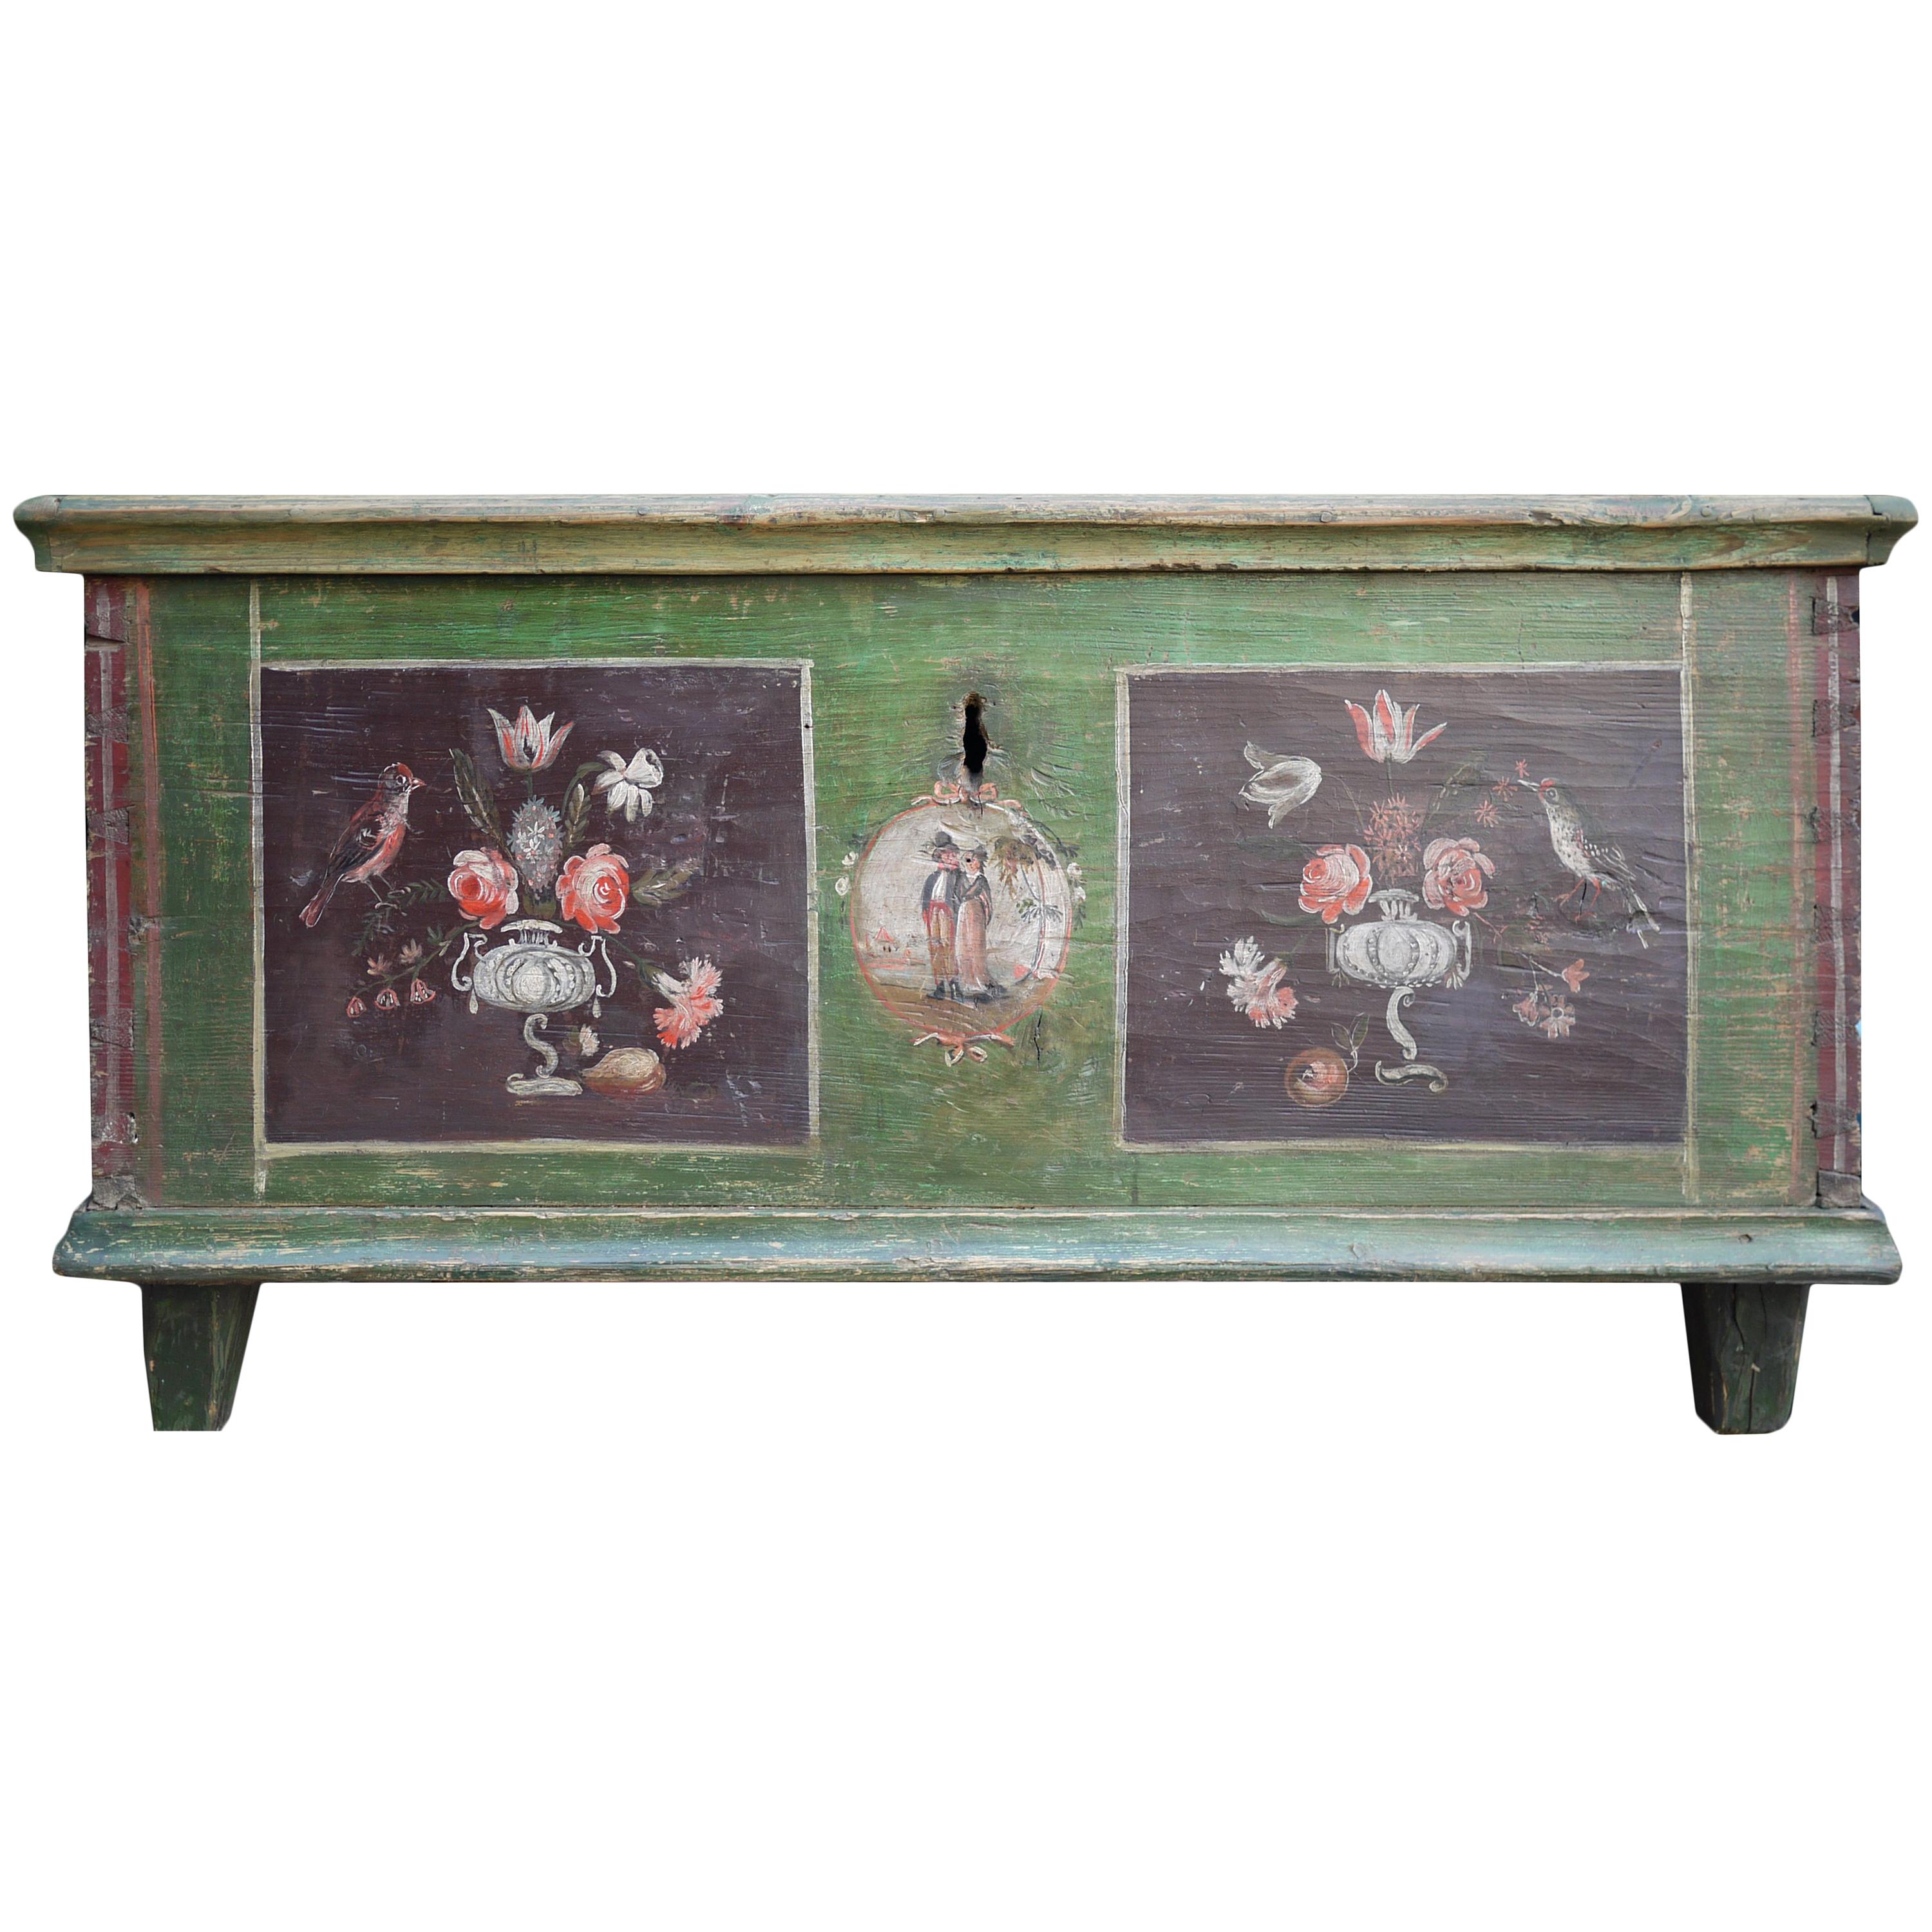 Early 19th Century Floral and Figure Italian Painted Bridal Chest